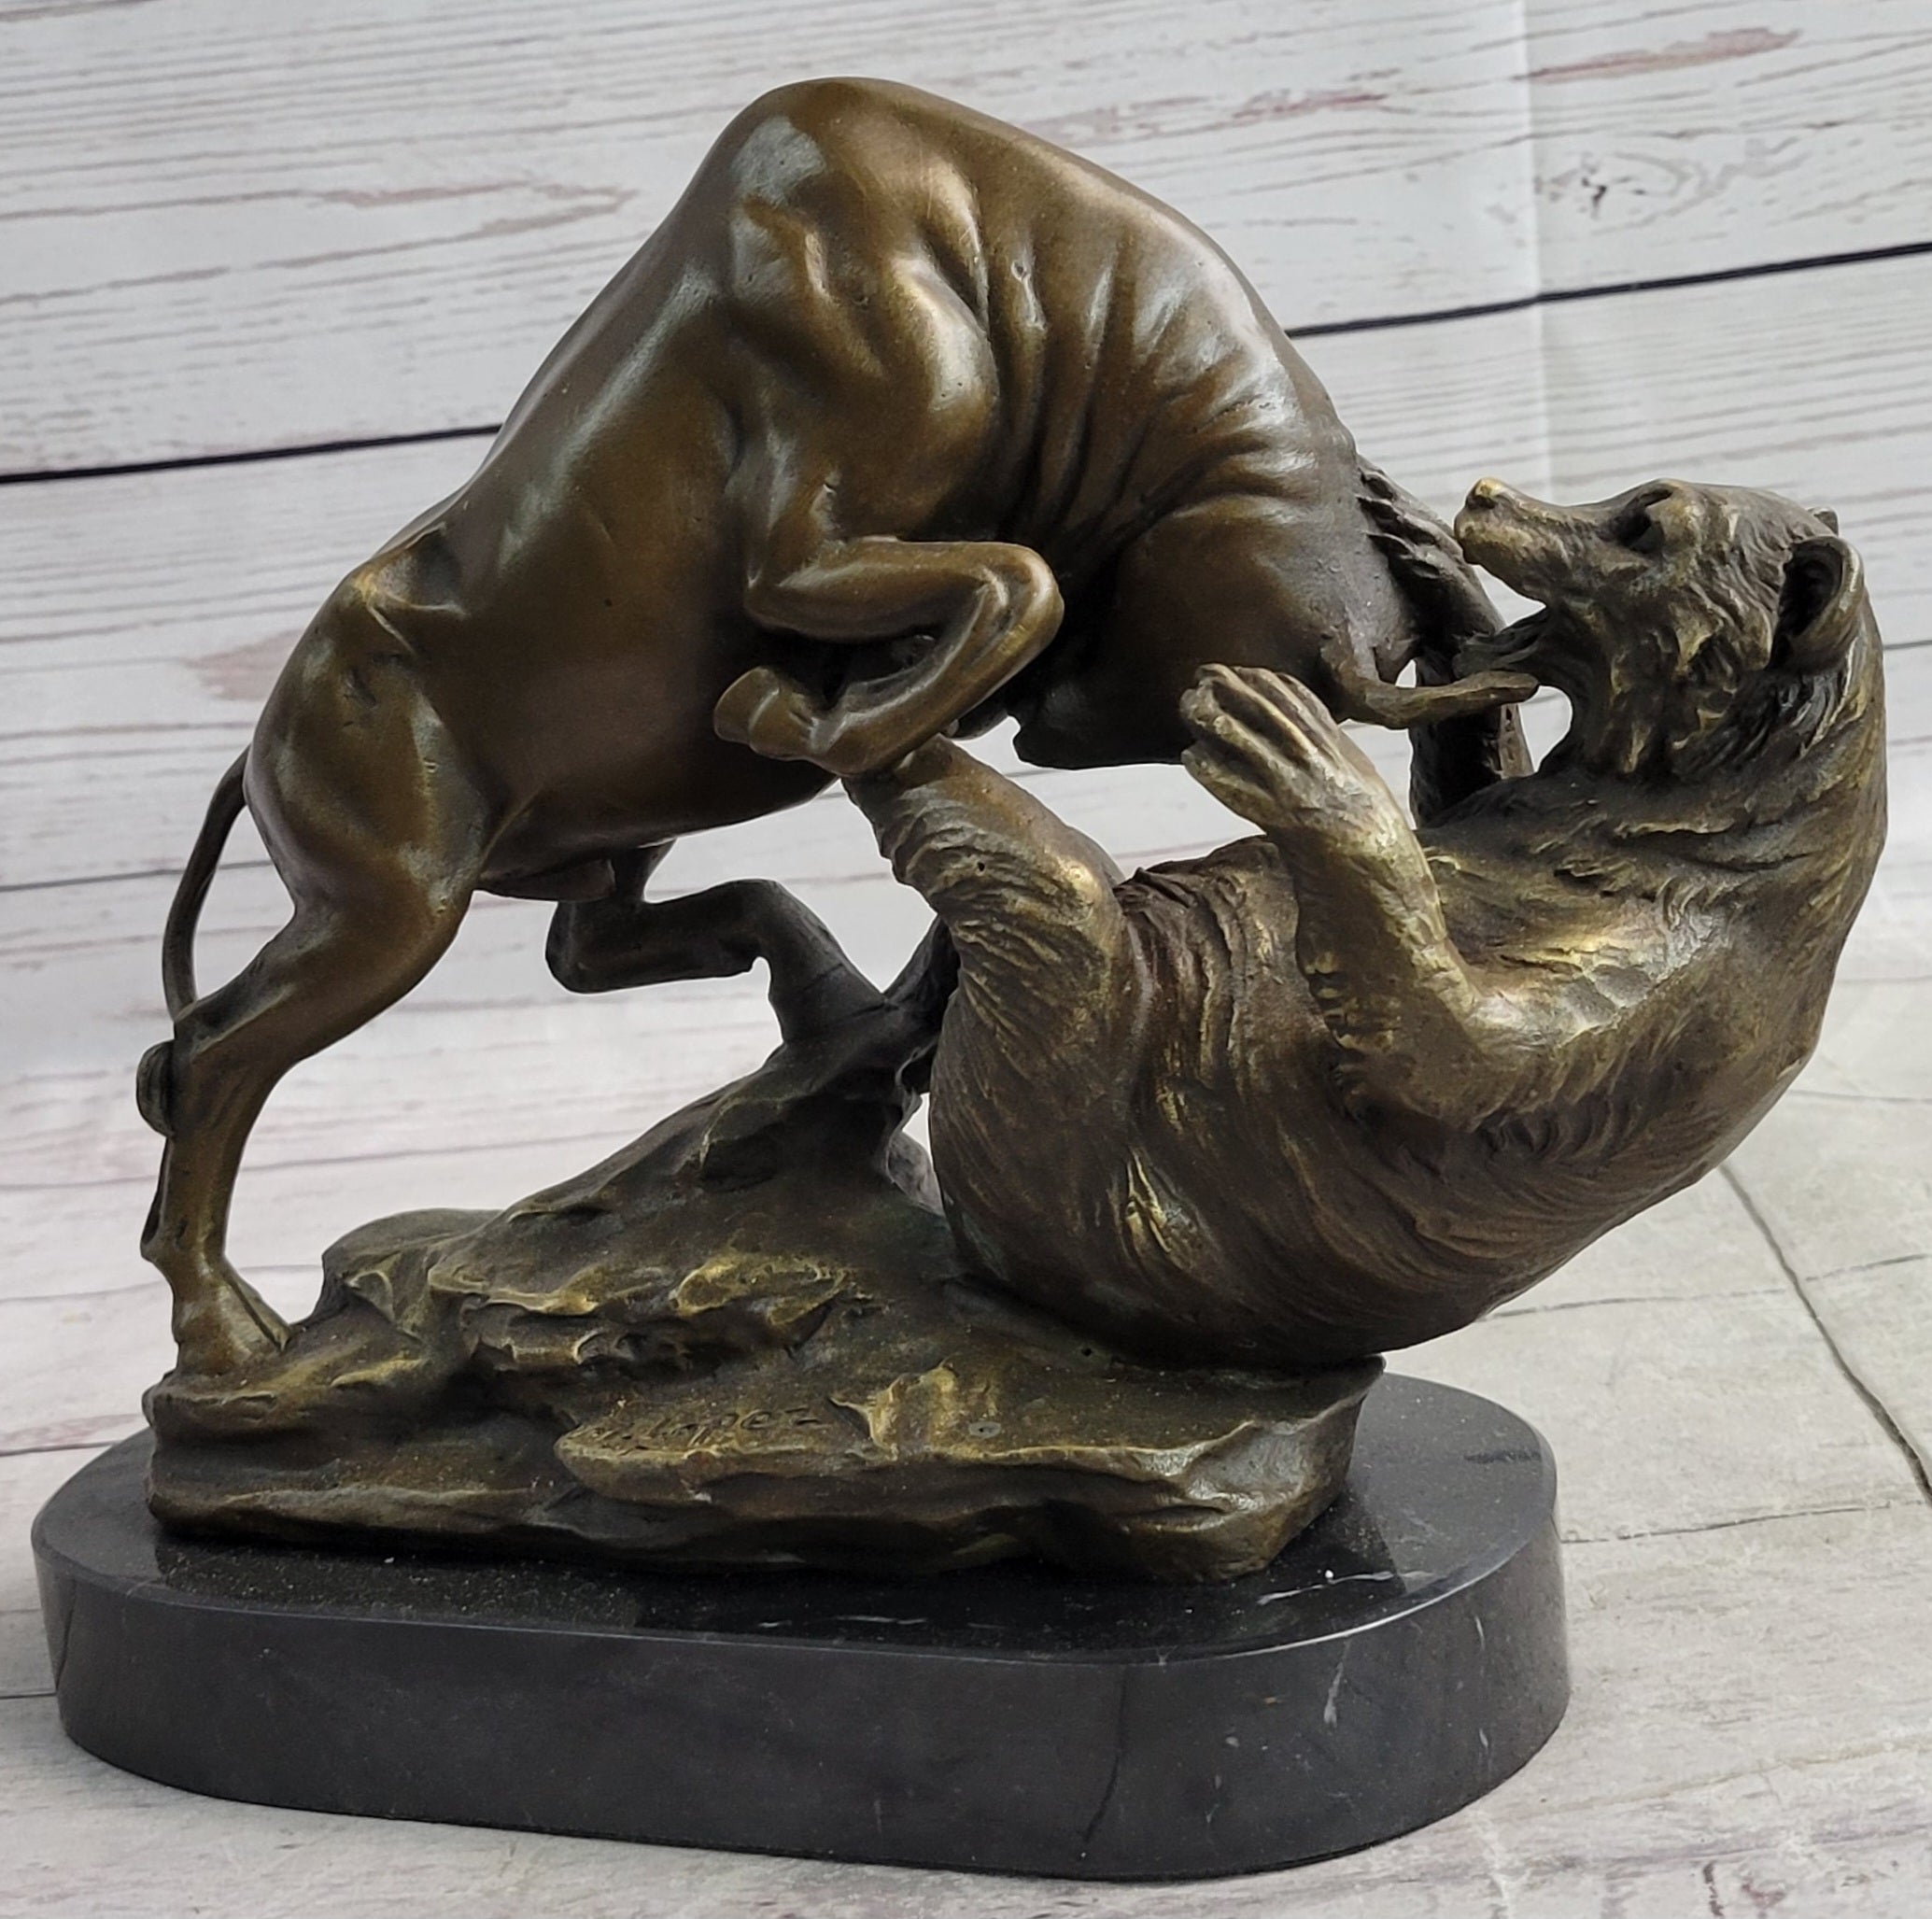 10 Best Decorative Art Sculptures for the Perfect Father's Day Gift